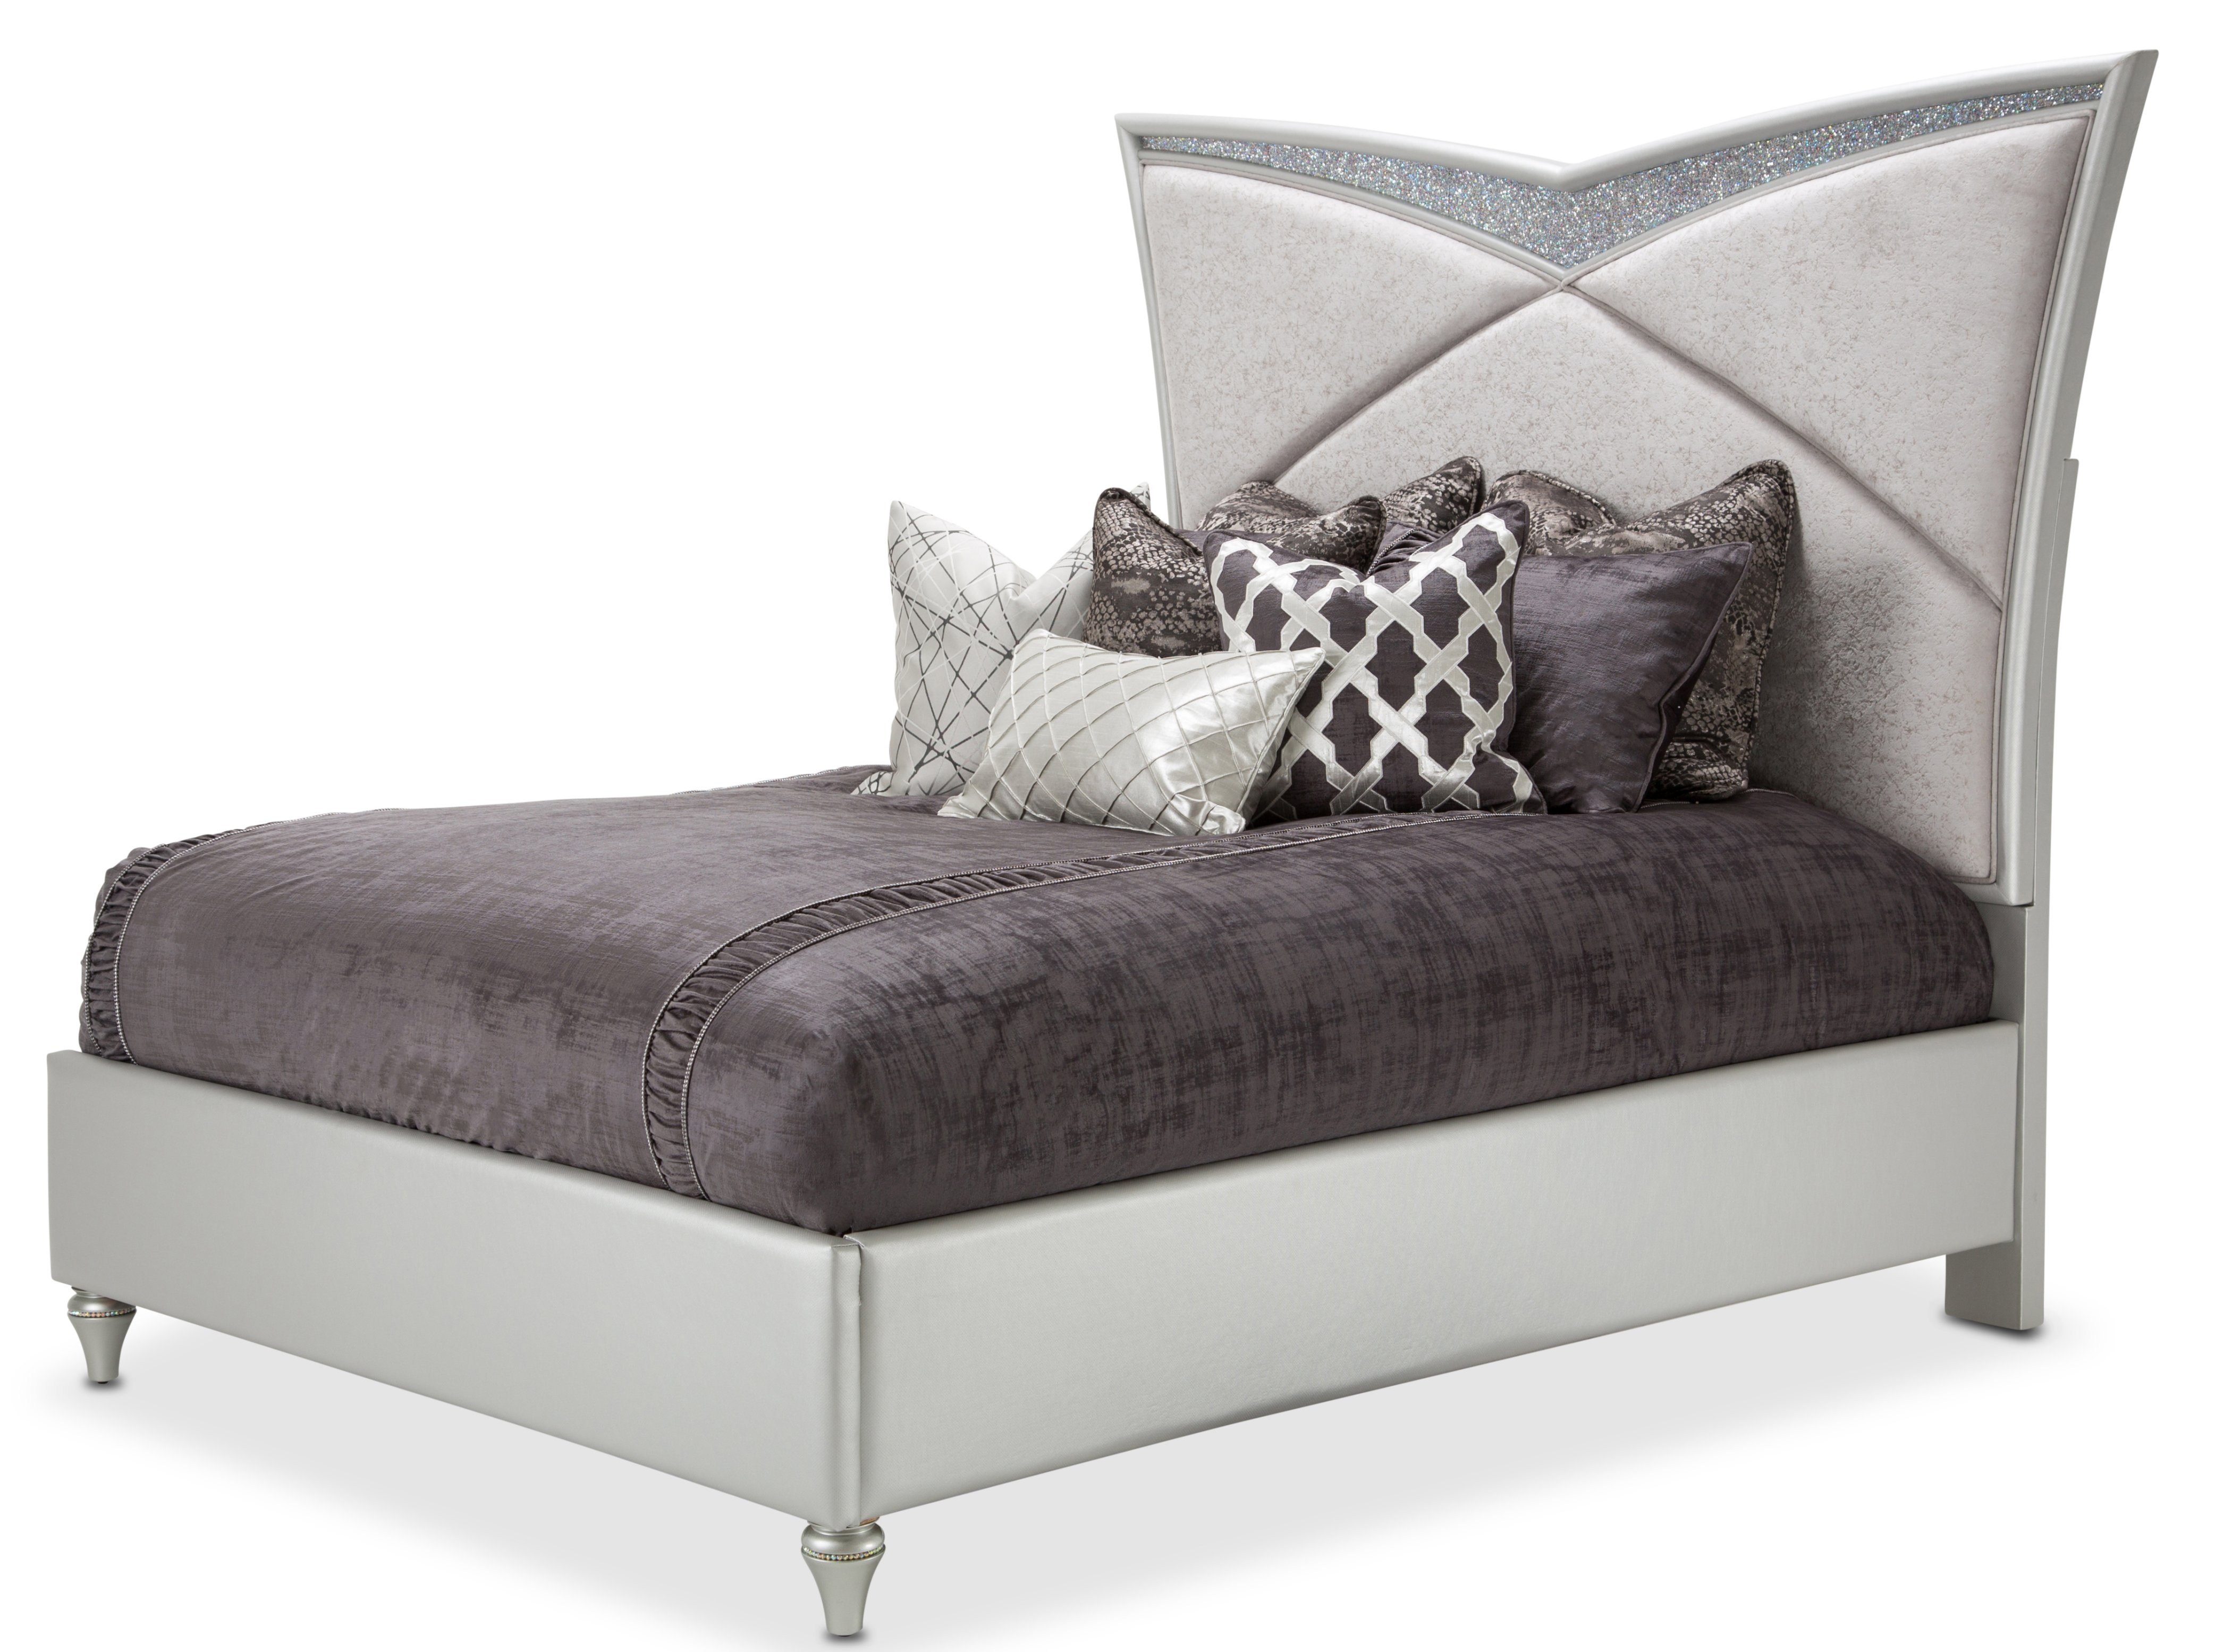 Cal-King Upholstered Bed